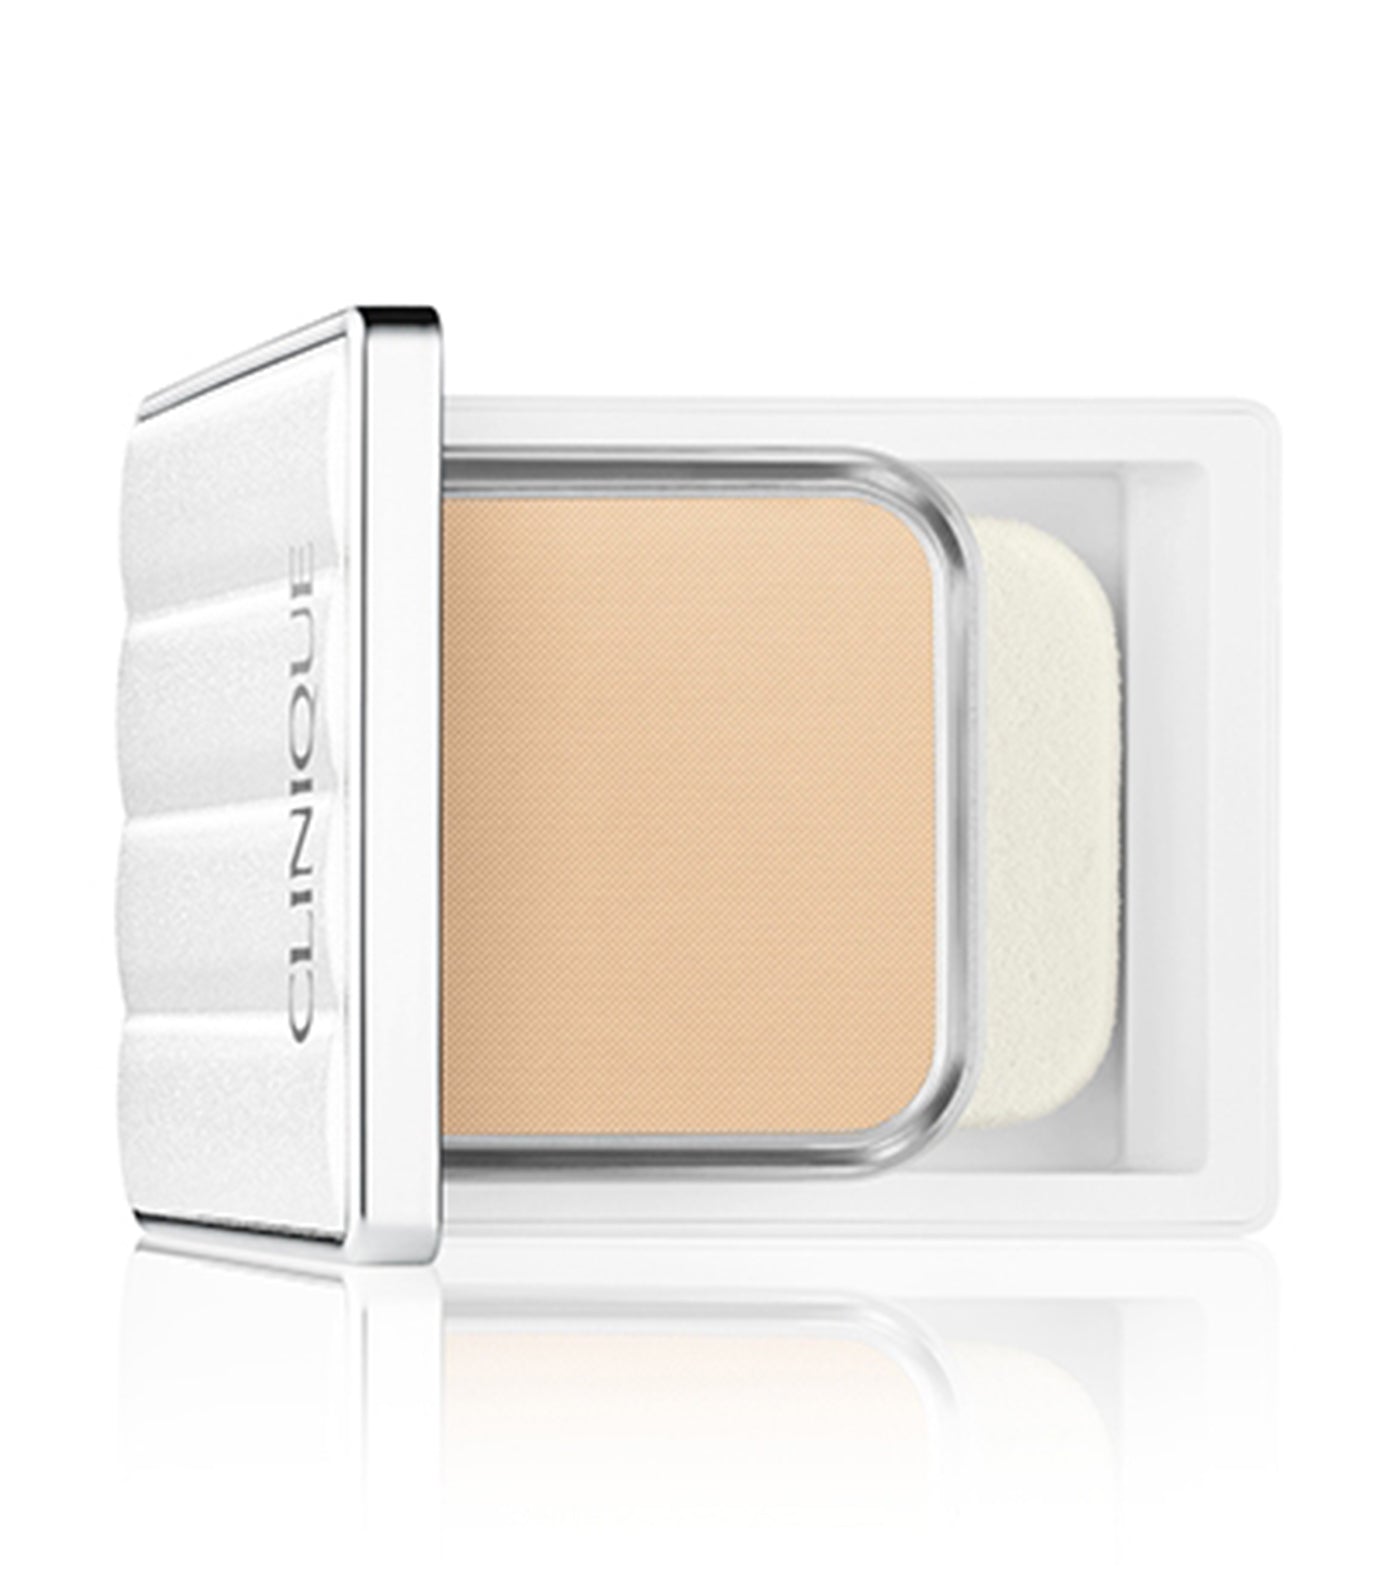 clinique ivory even better compact makeup broad spectrum spf 15